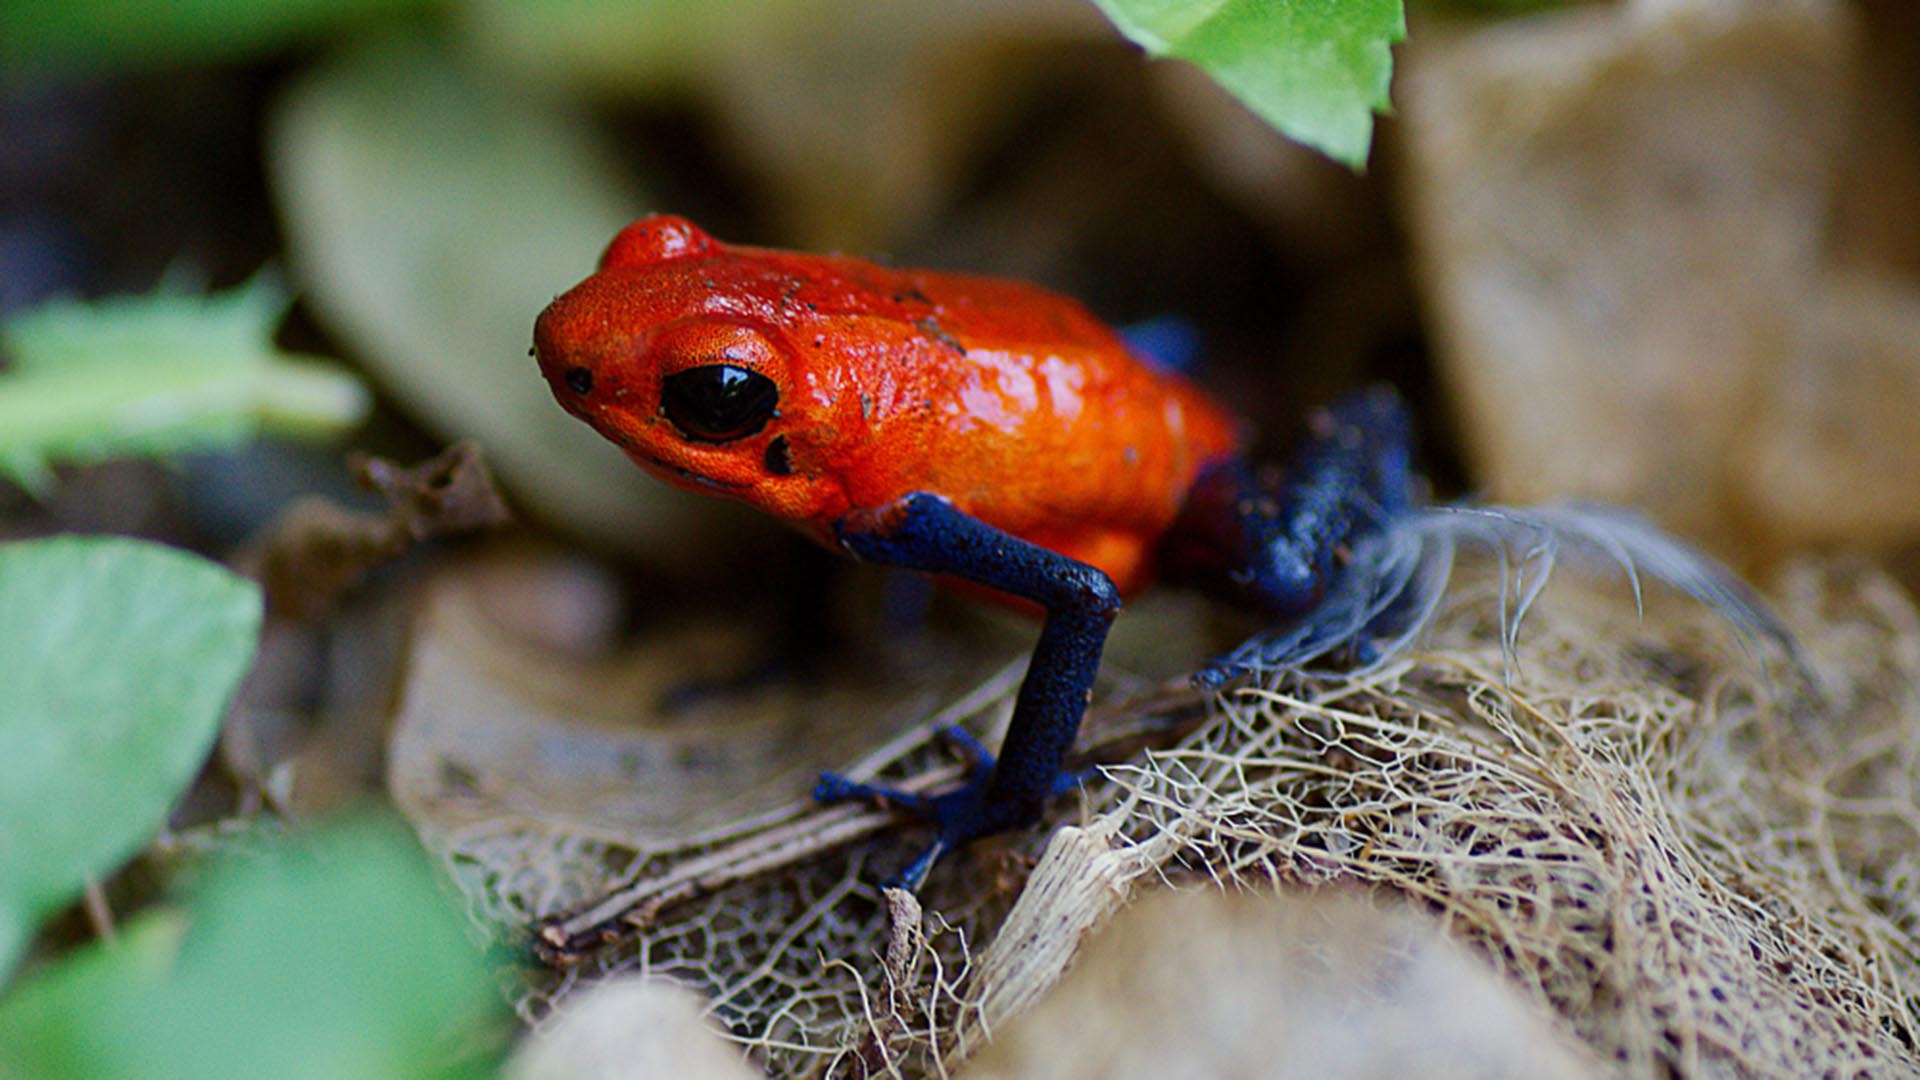 Join the 2021 SAVE THE FROGS! Costa Rica Ecotour